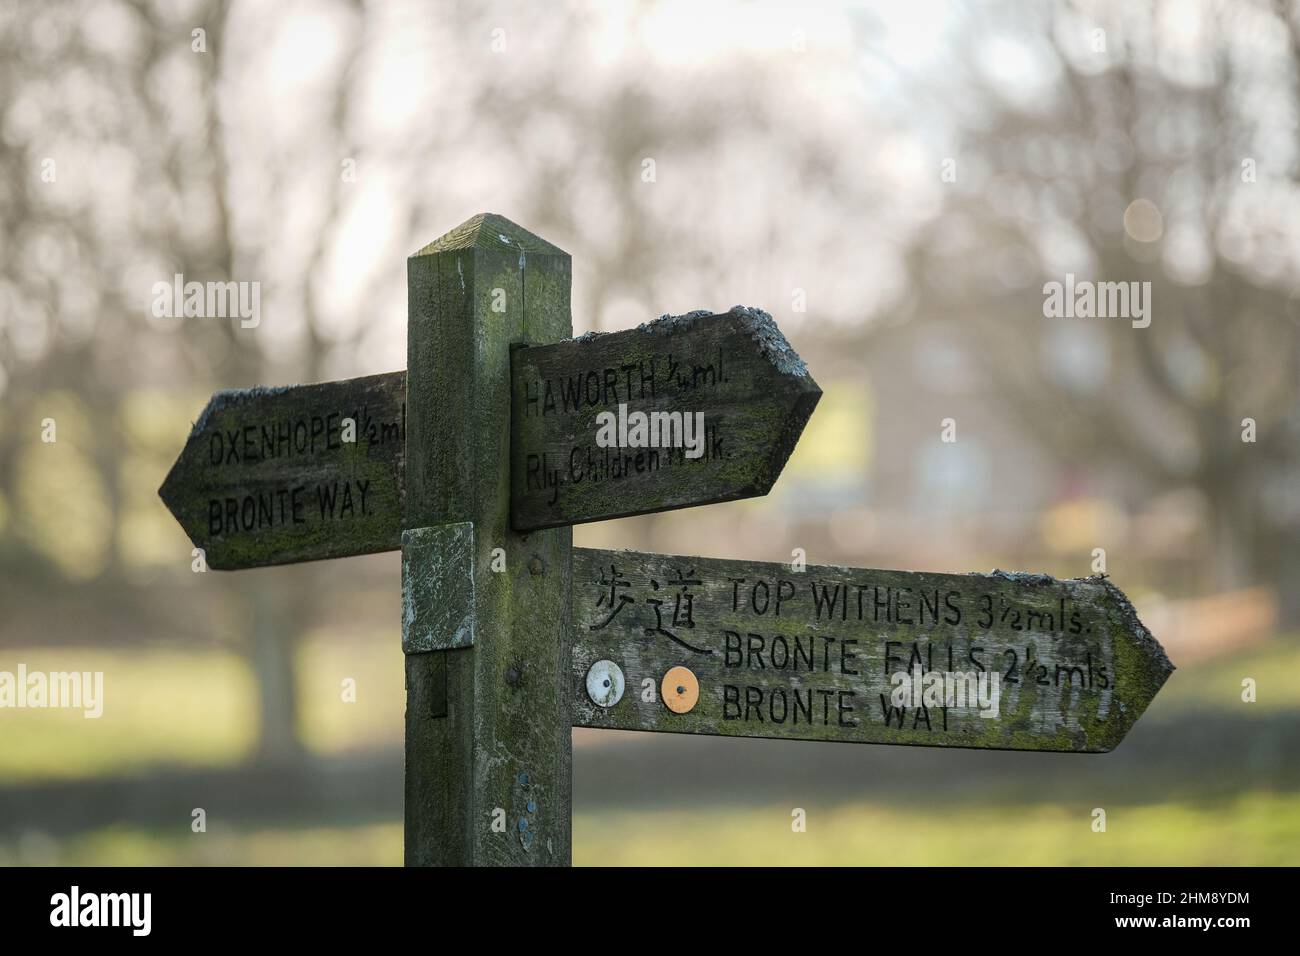 Haworth, UK: Signpost to walks across the moors in Howarth, West Yorkshire which attracts tourists from around the world because of its connections to Stock Photo